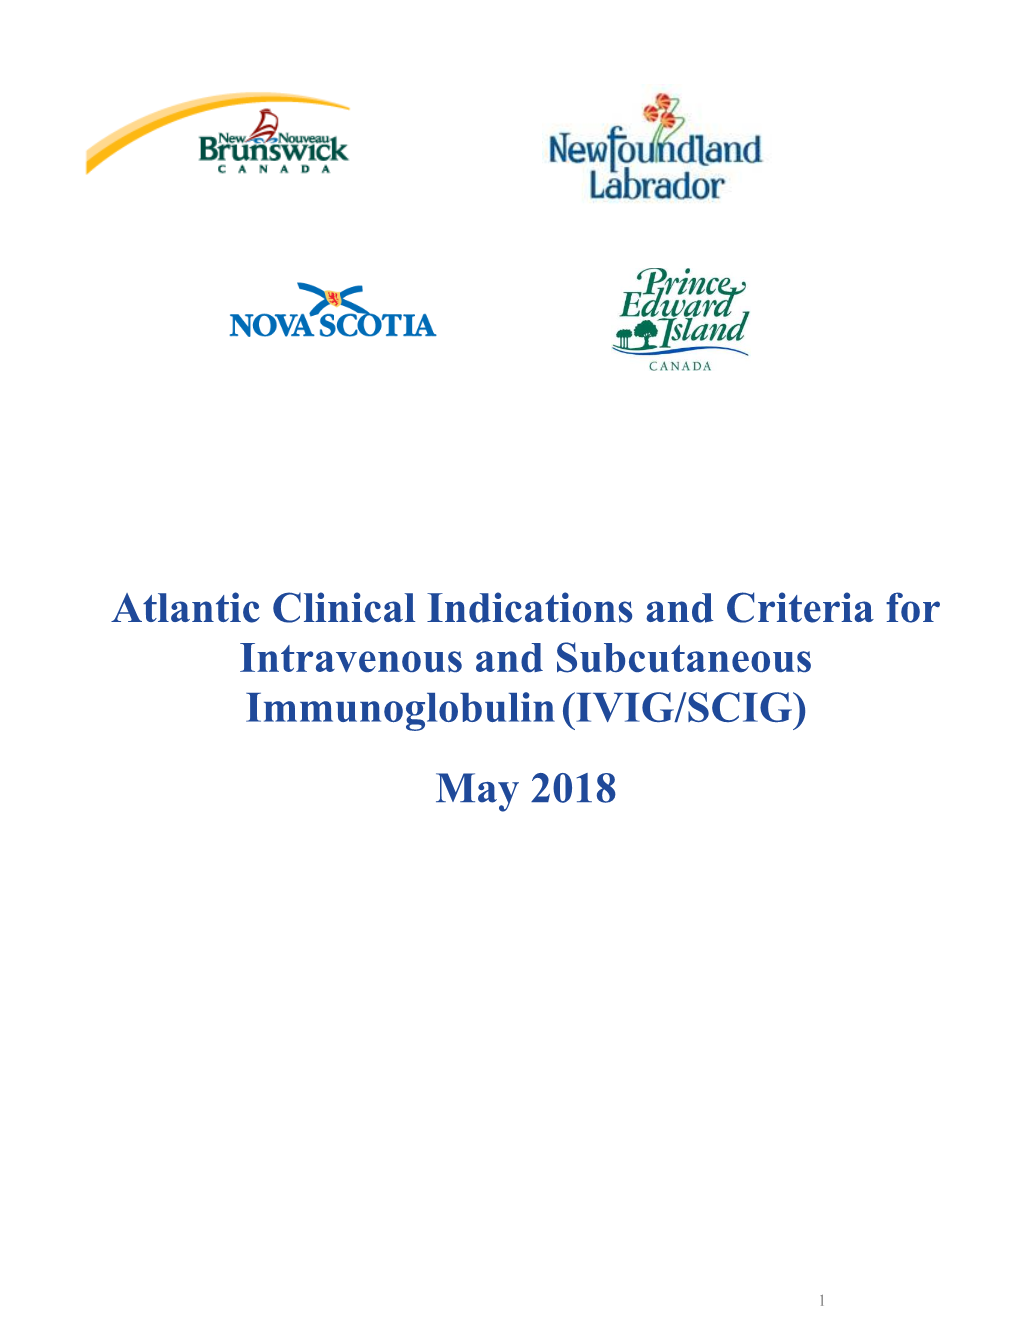 Atlantic Clinical Indications and Criteria for Intravenous and Subcutaneous Immunoglobulin (IVIG/SCIG)